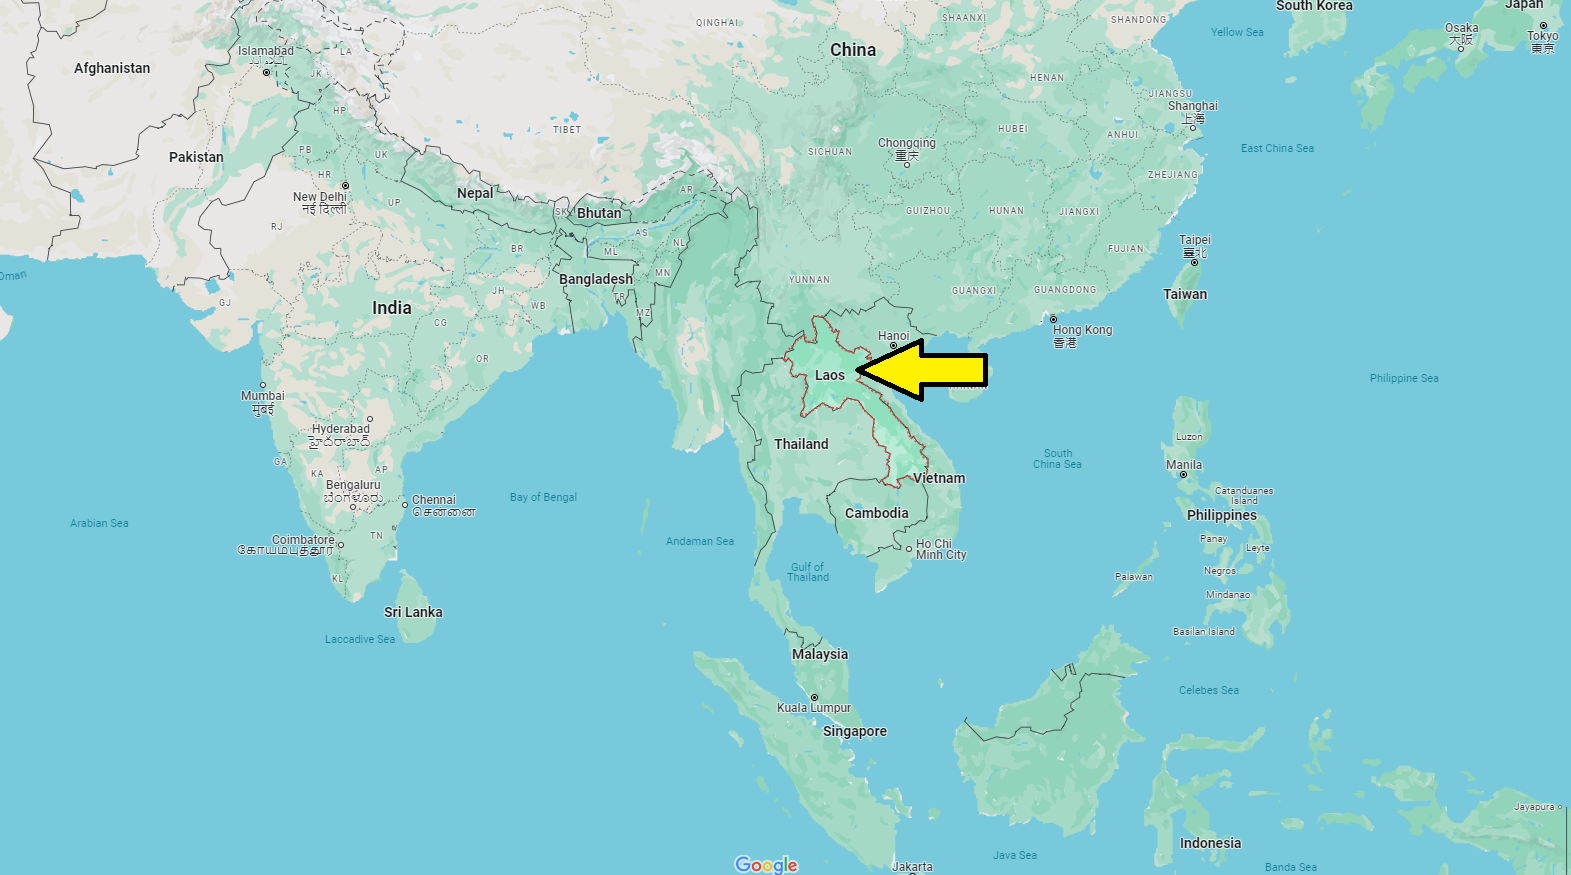 What Continent is Laos in